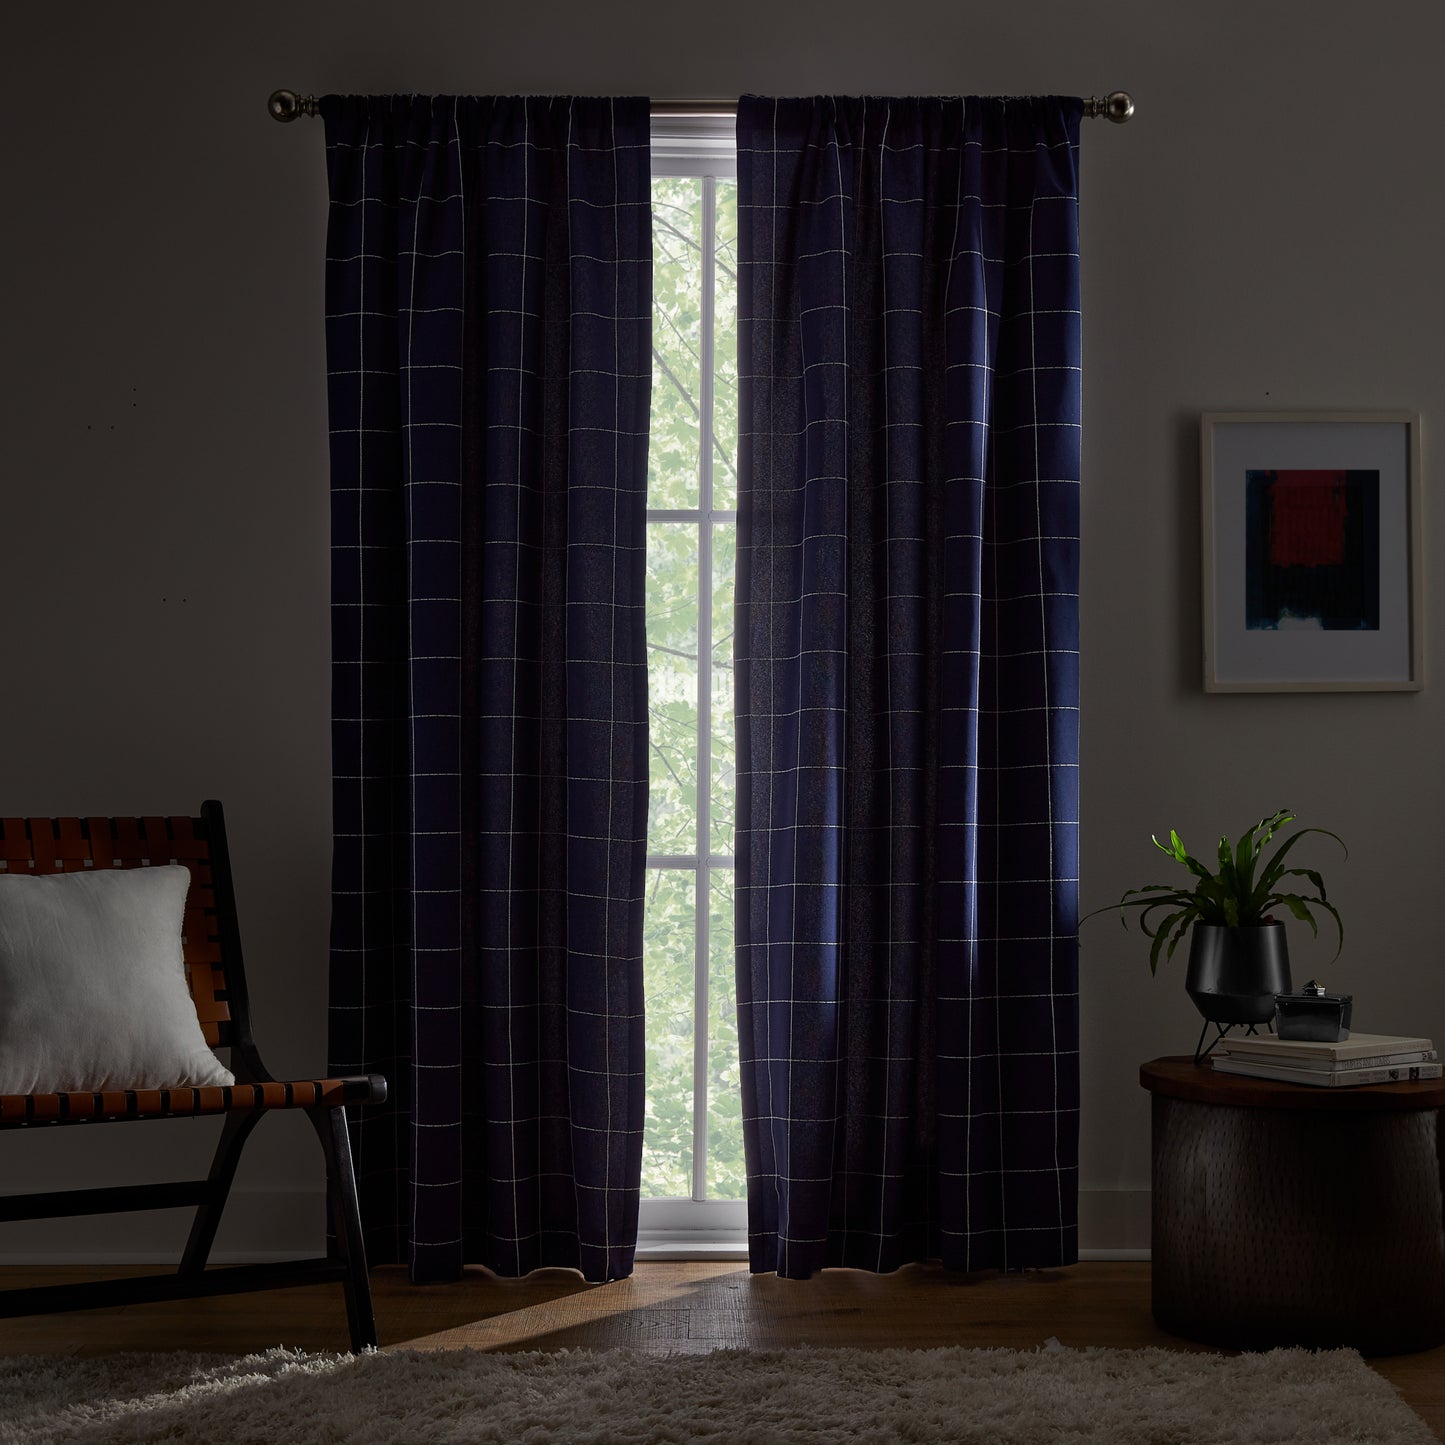 Tommy Hilfiger Big Check Curtain Panel Pair